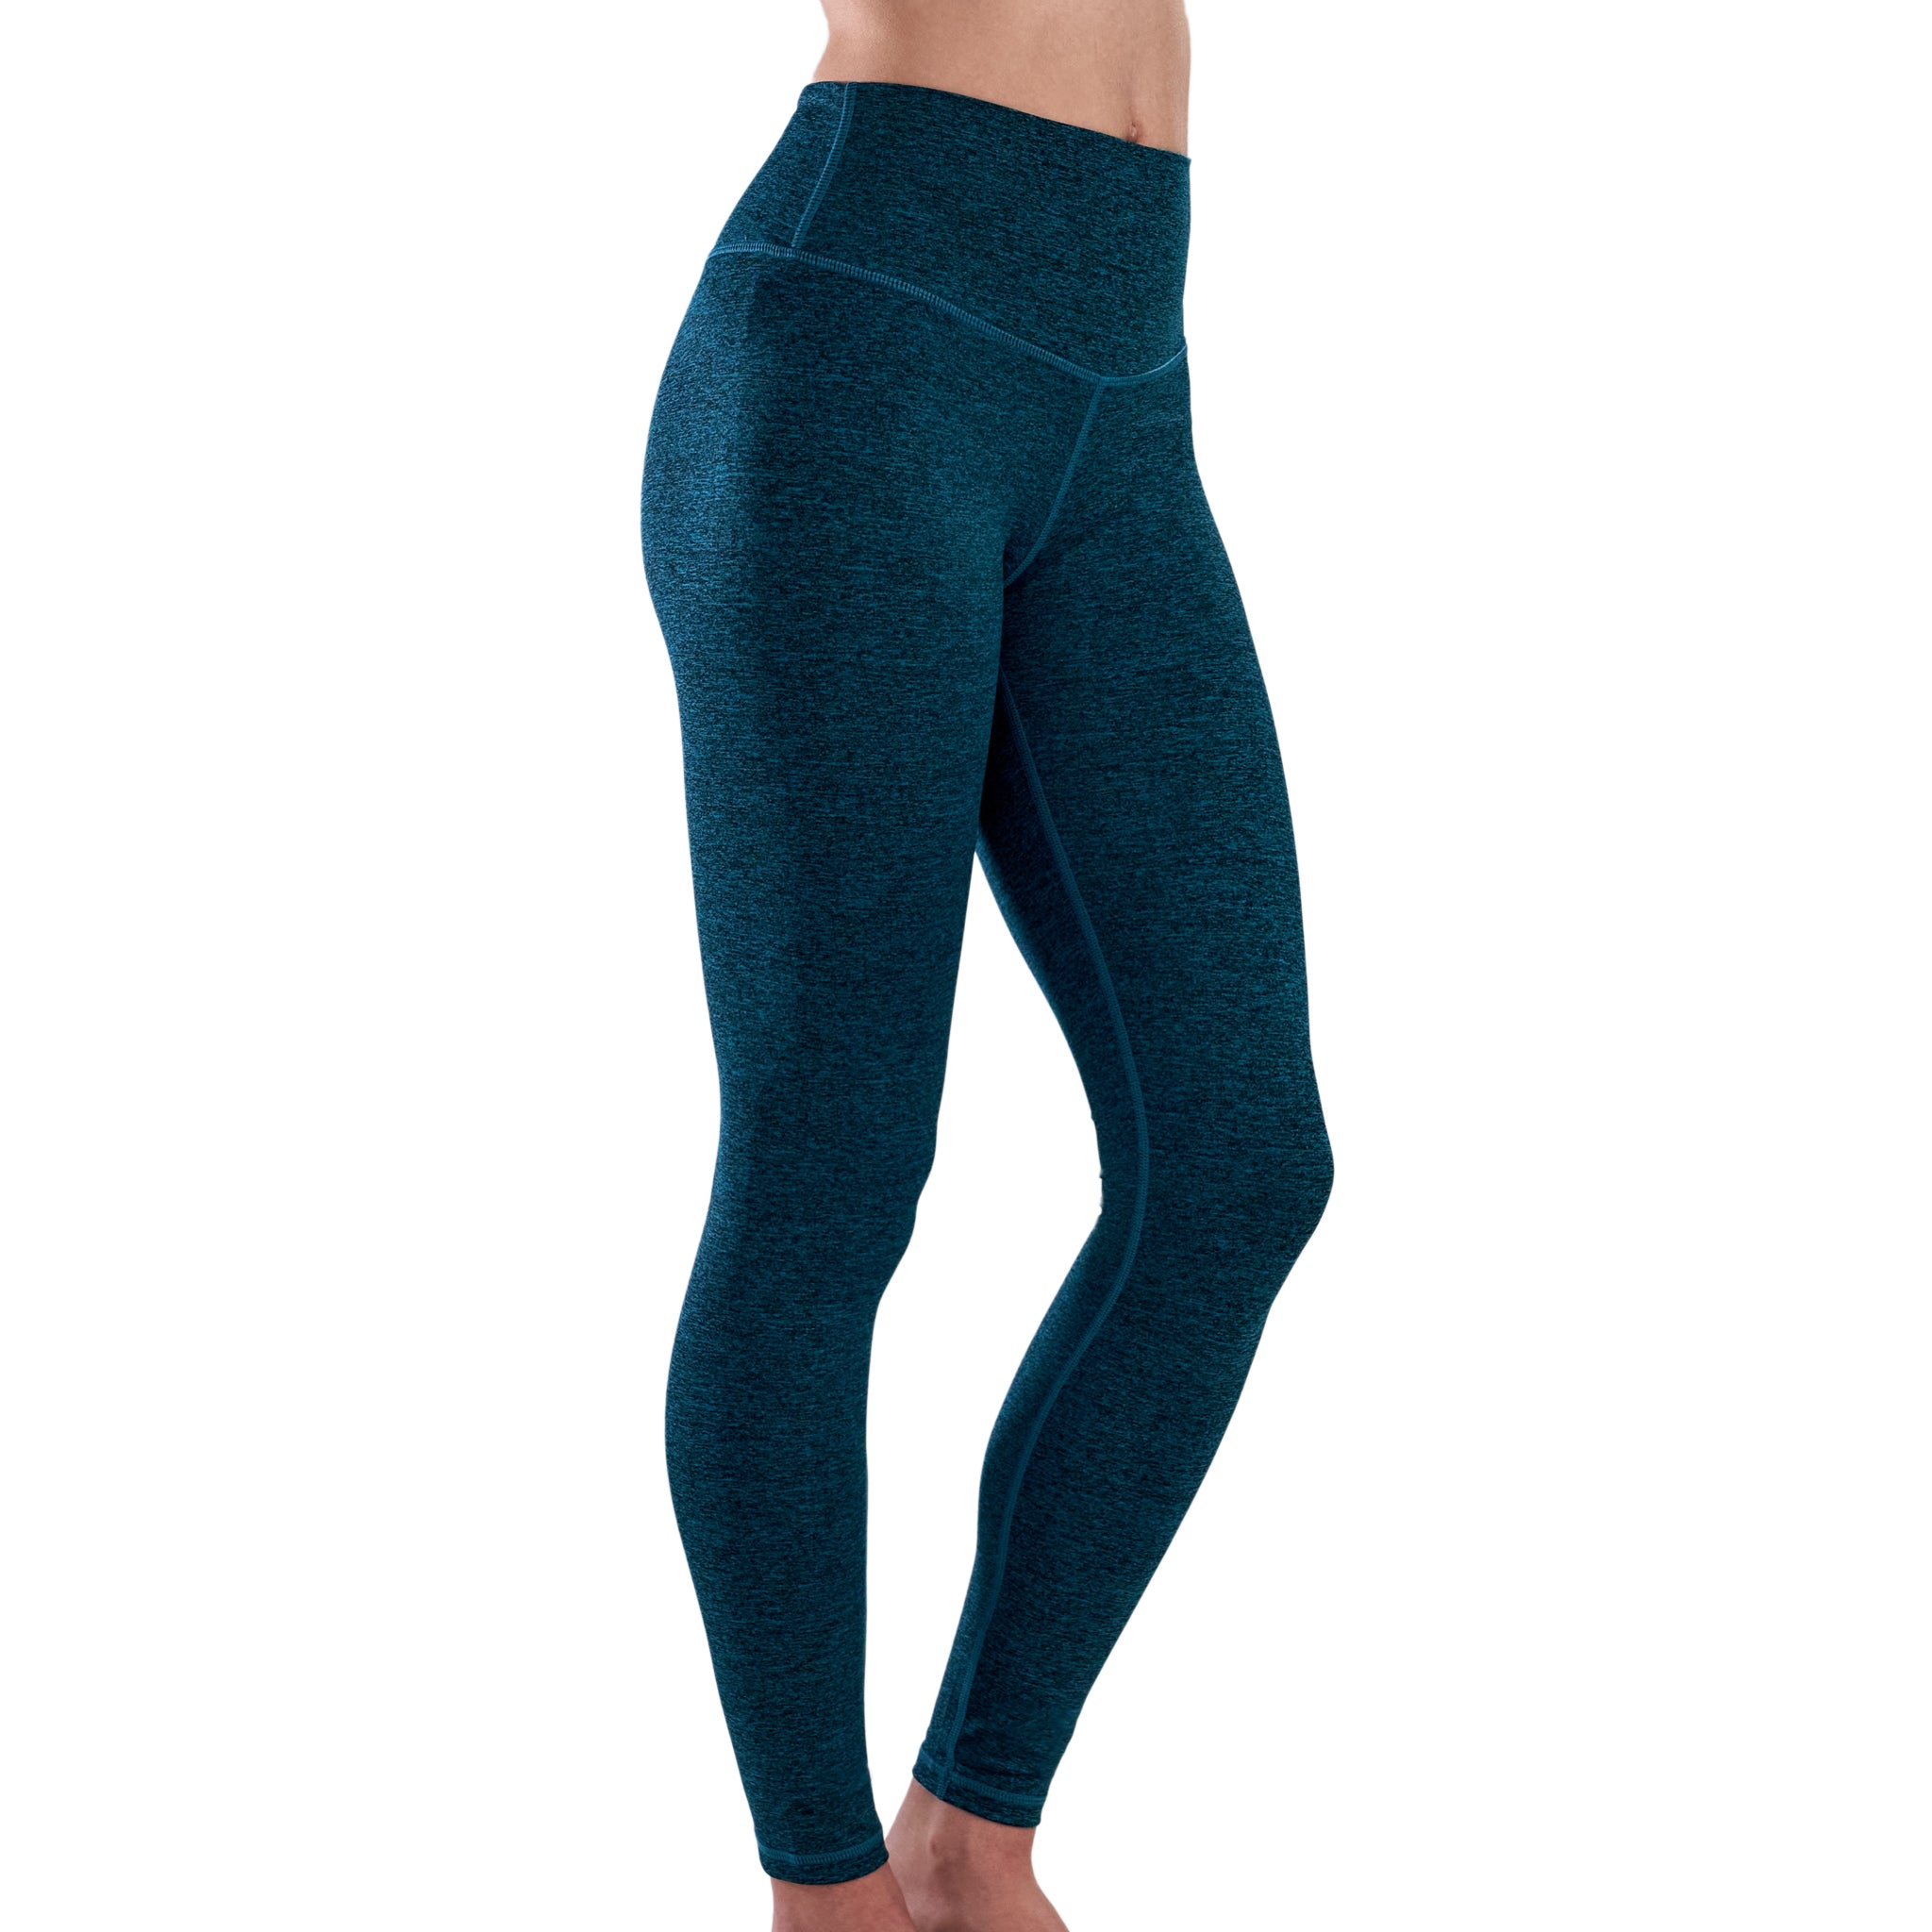 G GATLING Women's high Waisted Seamless Compression Leggings for